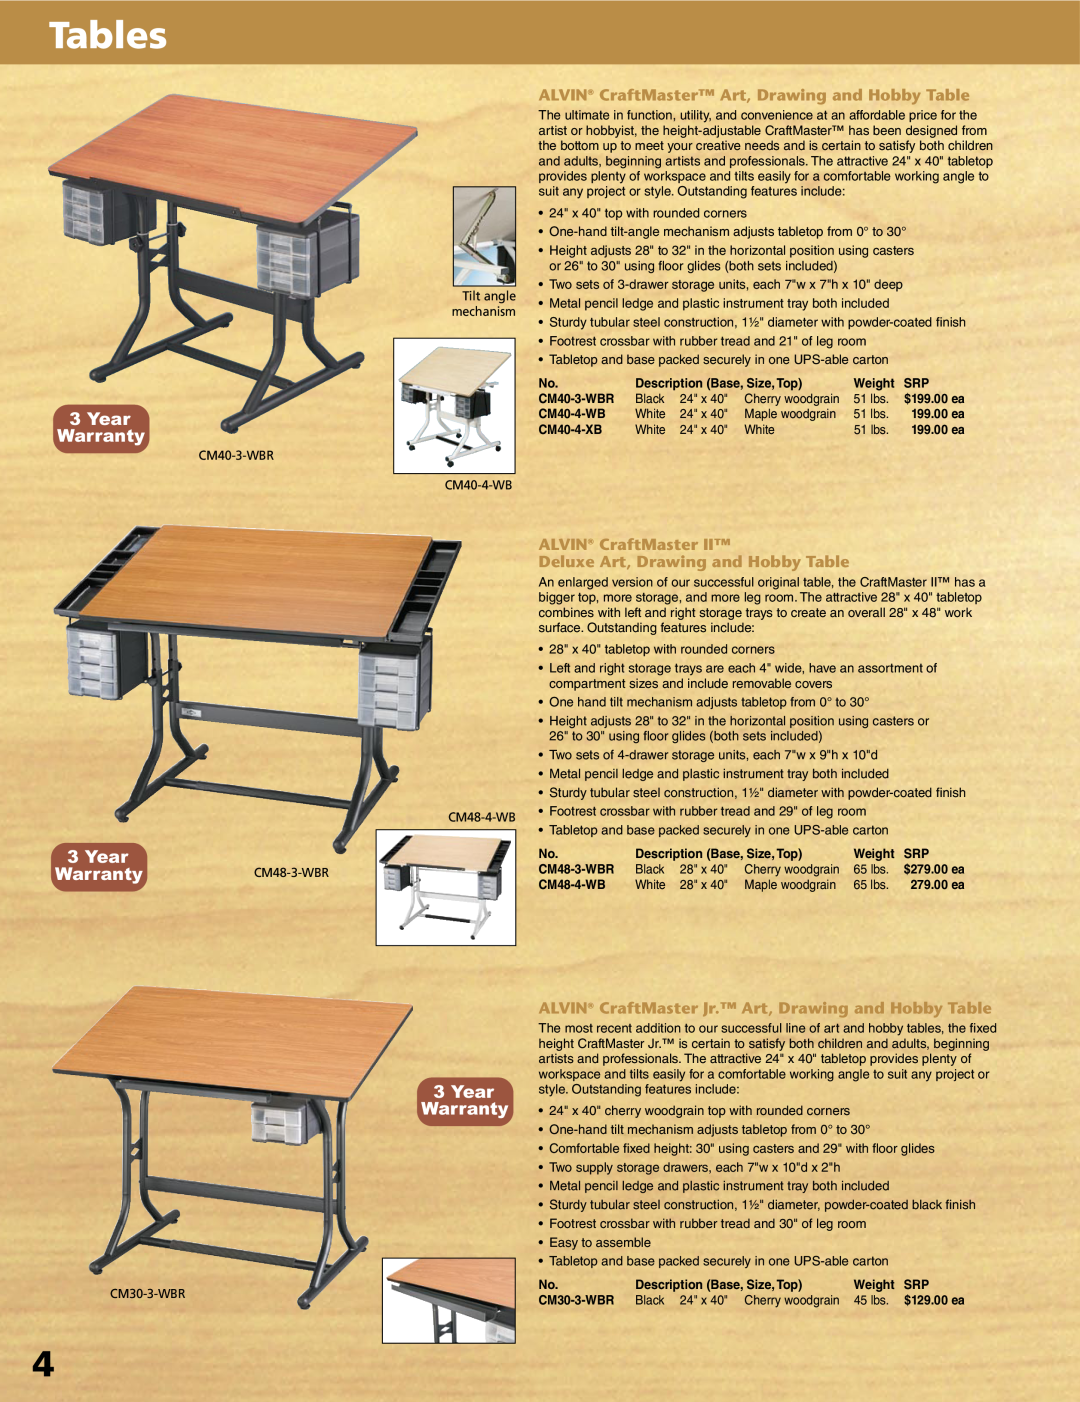 Alvin XX-4-XB Tables, 3Year Warranty, ALVIN CraftMaster Art, Drawing and Hobby Table, Deluxe Art, Drawing and Hobby Table 